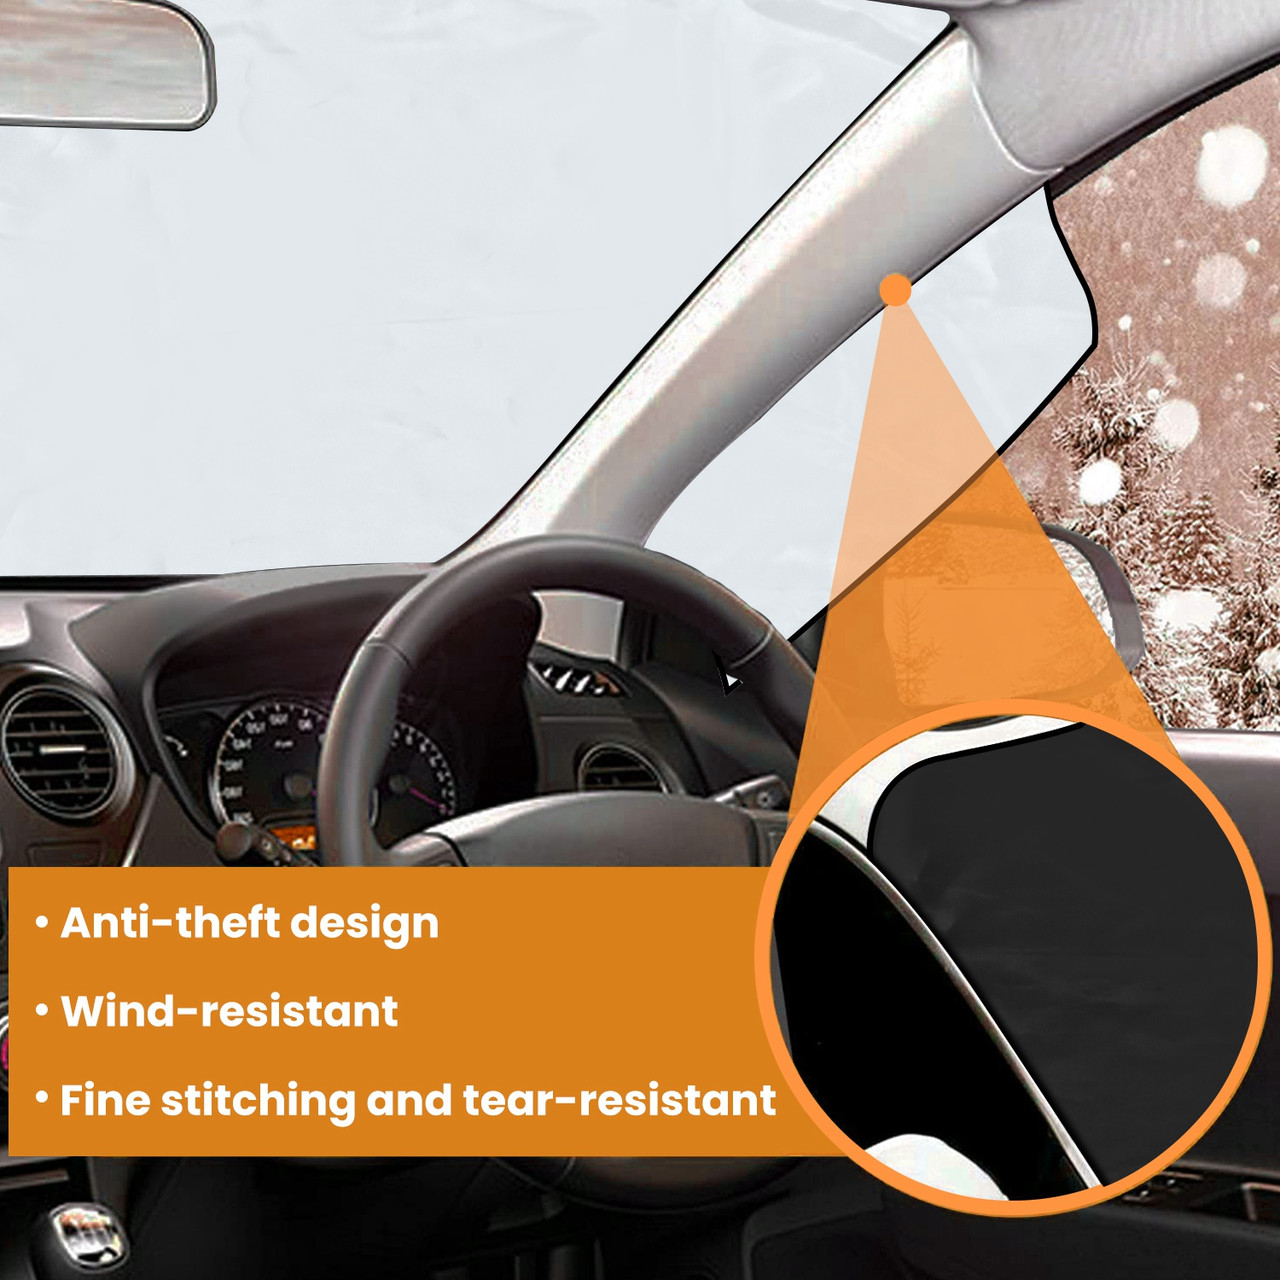 iMounTEK® Magnetic Car Windshield Covers product image